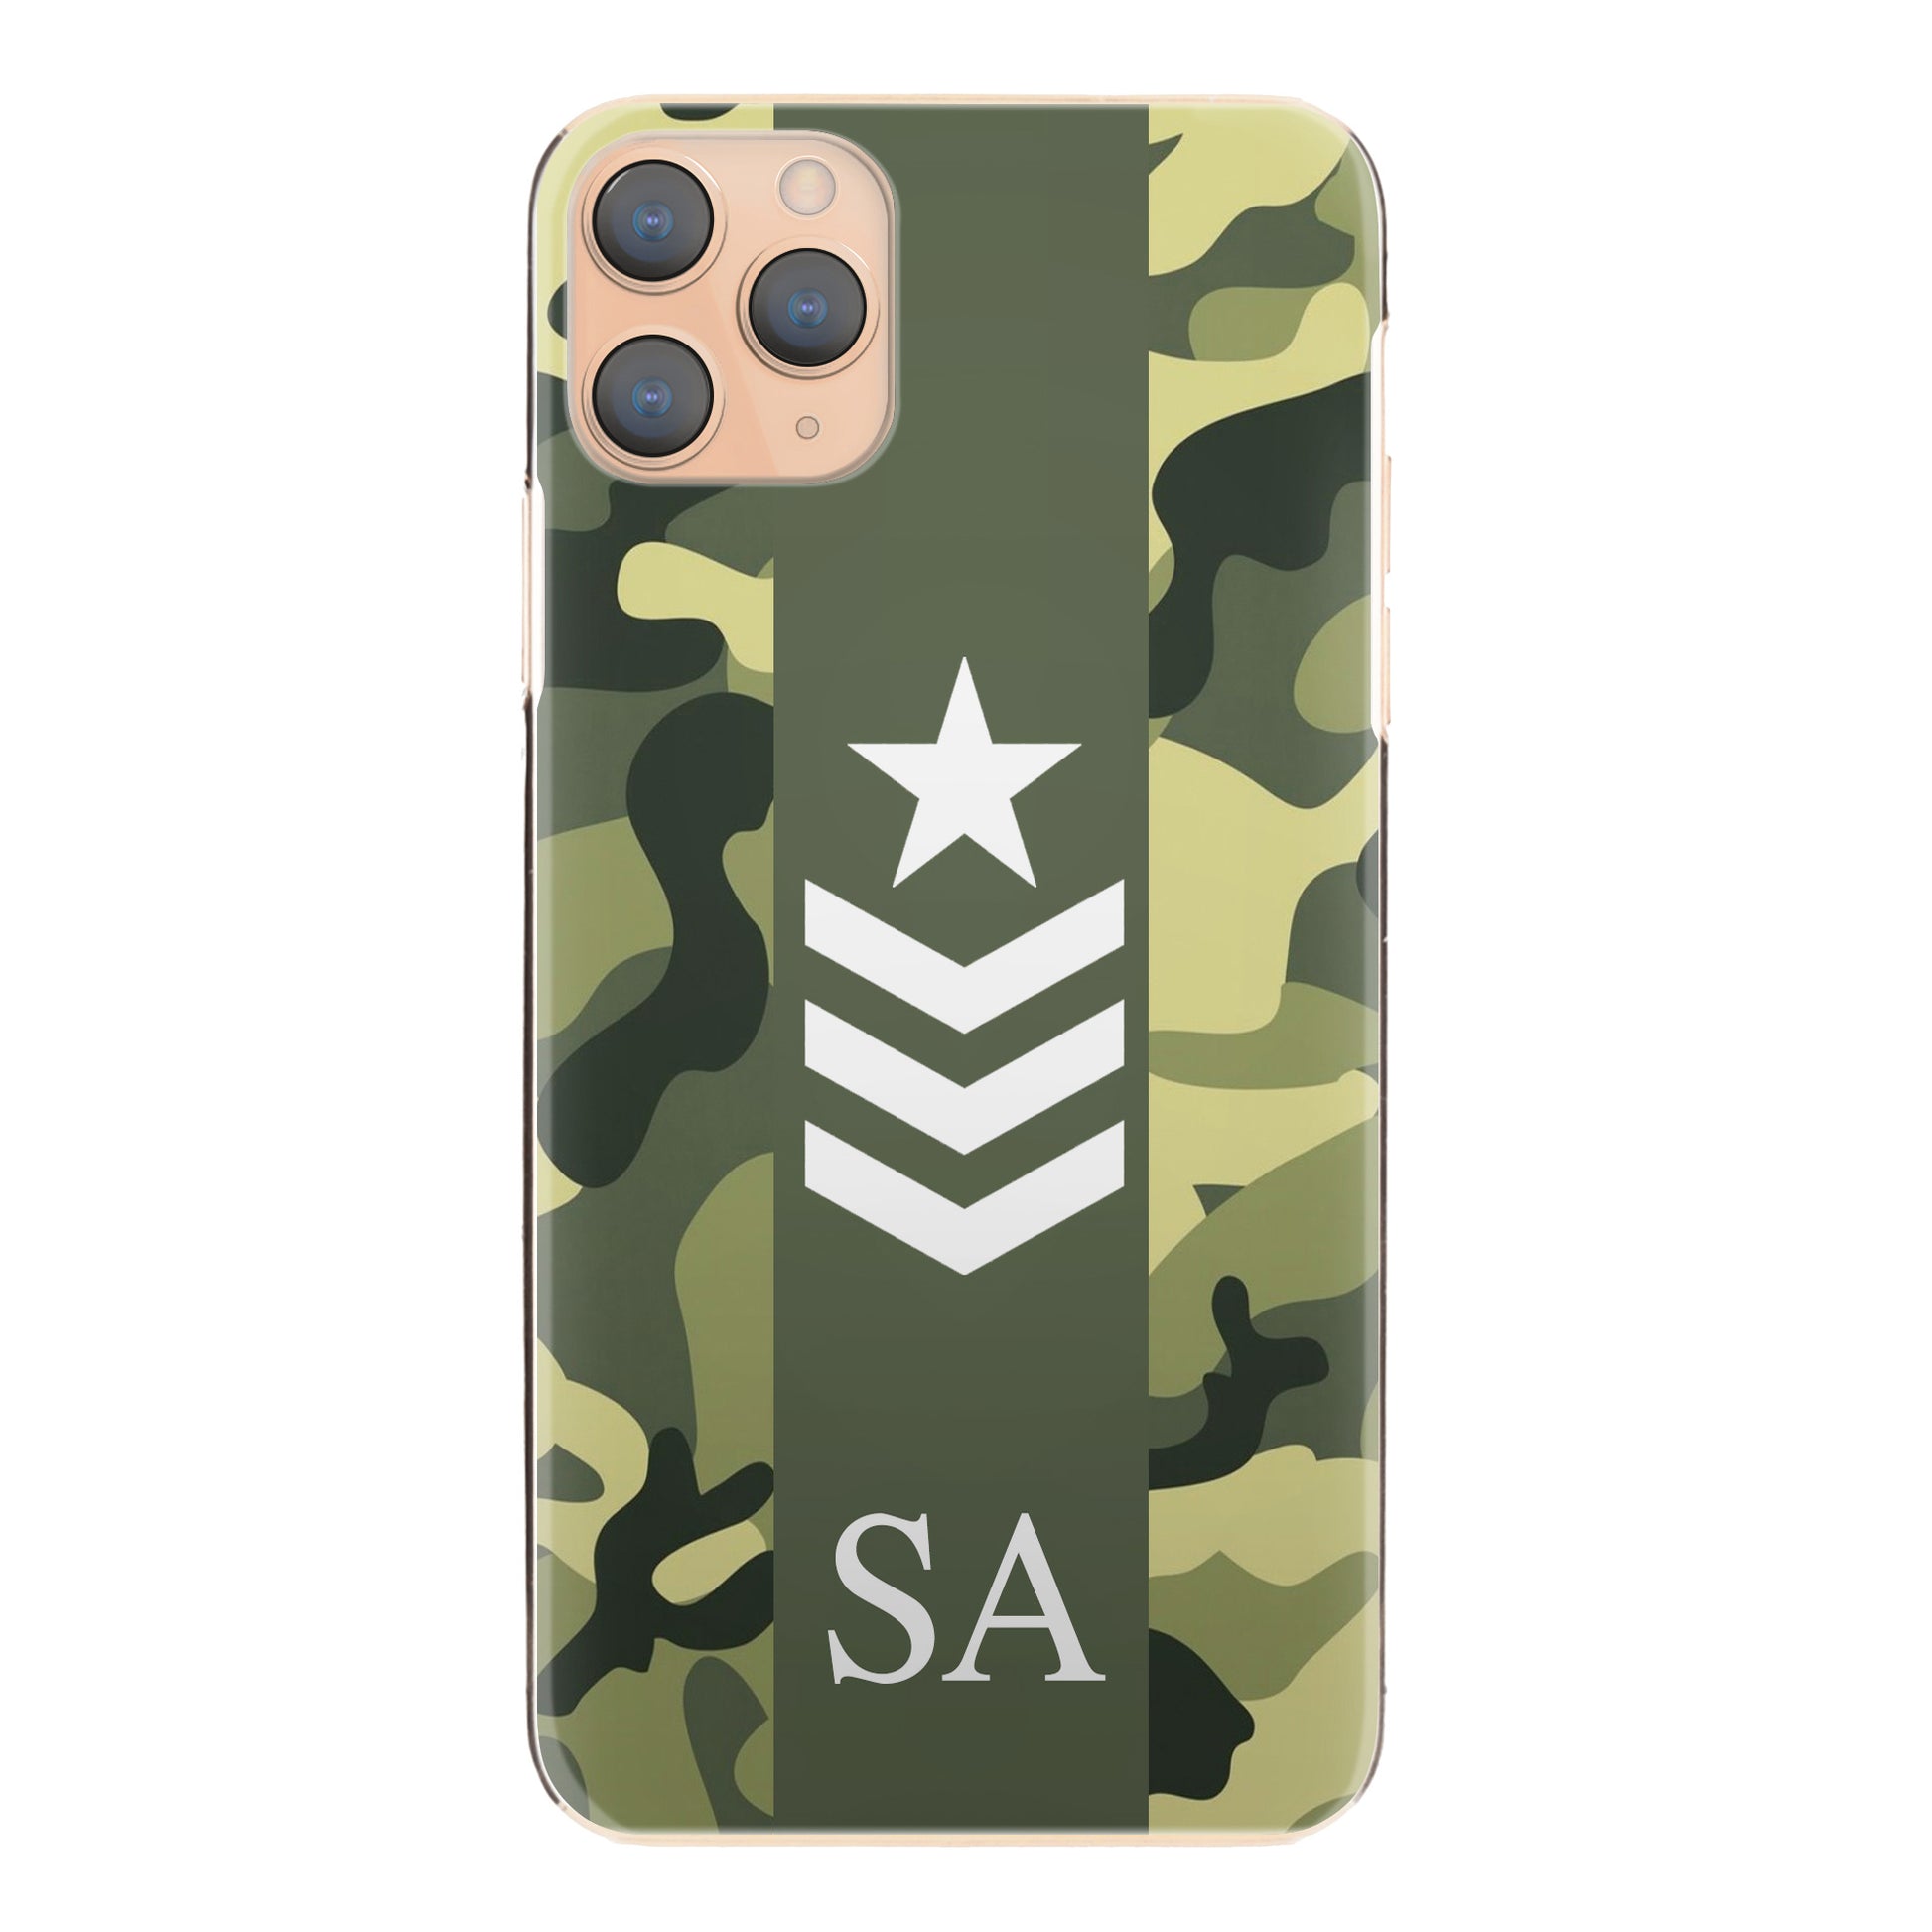 Personalised Huawei Phone Hard Case with Initials and Army Rank on Classic Green Camo